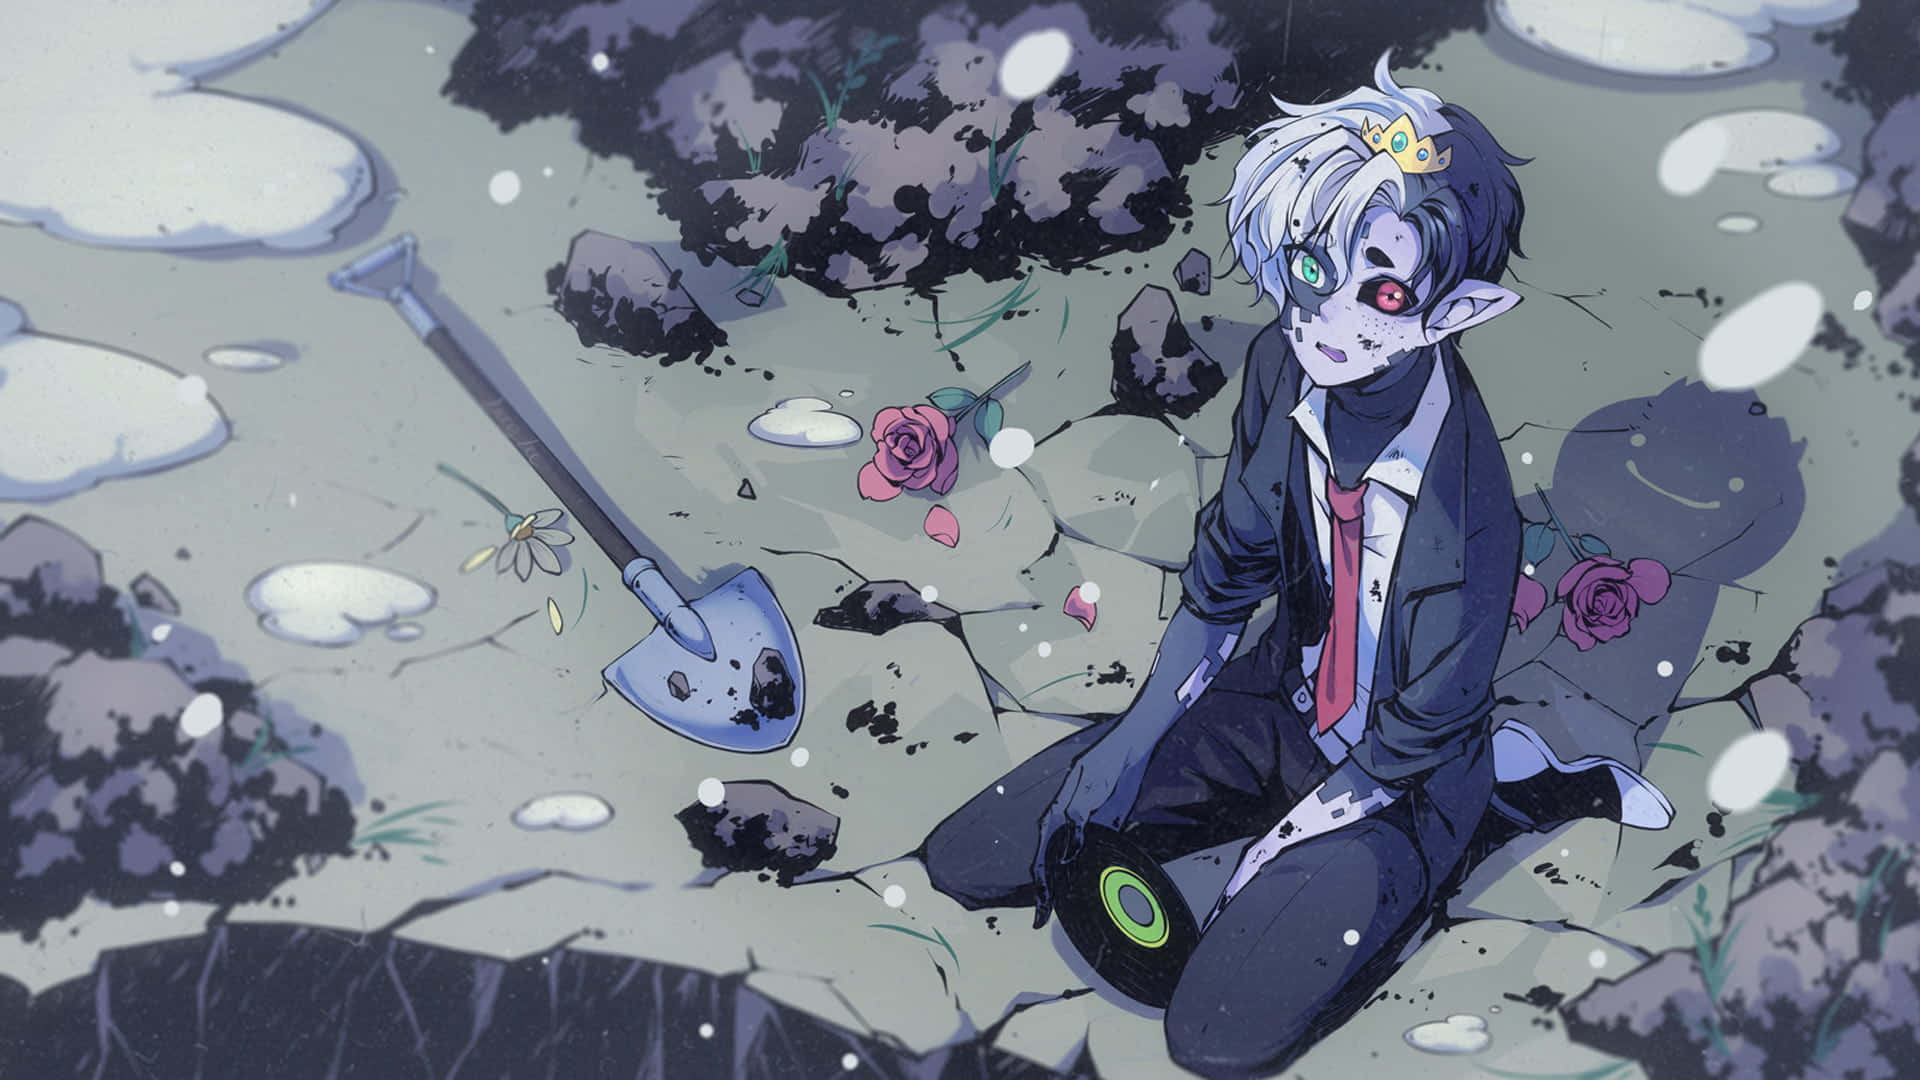 A Boy With A Knife And A Sword Sitting On The Ground